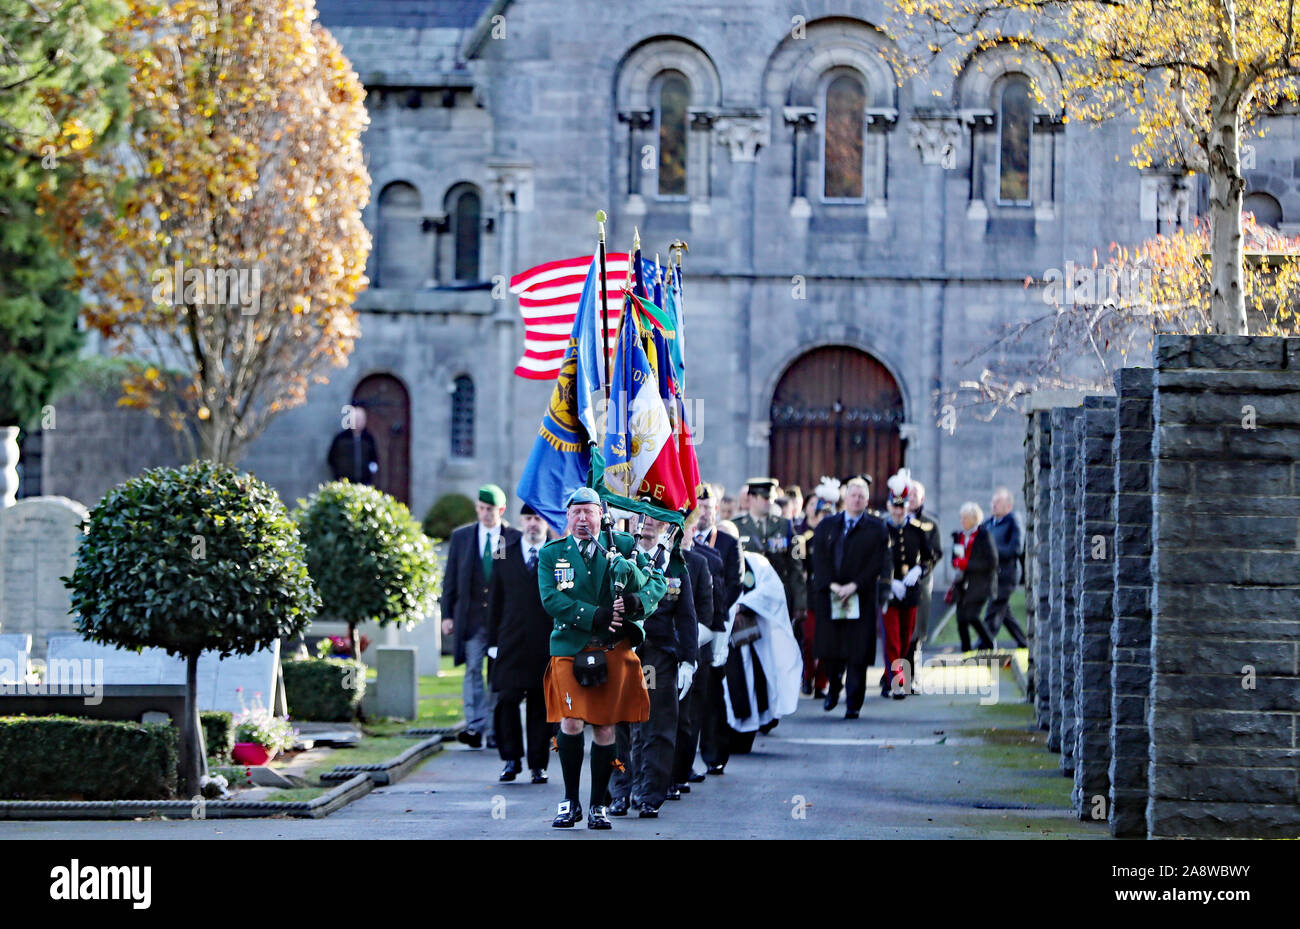 Flagbearers carrying flags of allied nations who took part in World War One during a service at Glasnevin cemetery, Dublin, to mark Armistice Day, the anniversary of the end of the First World War. Stock Photo